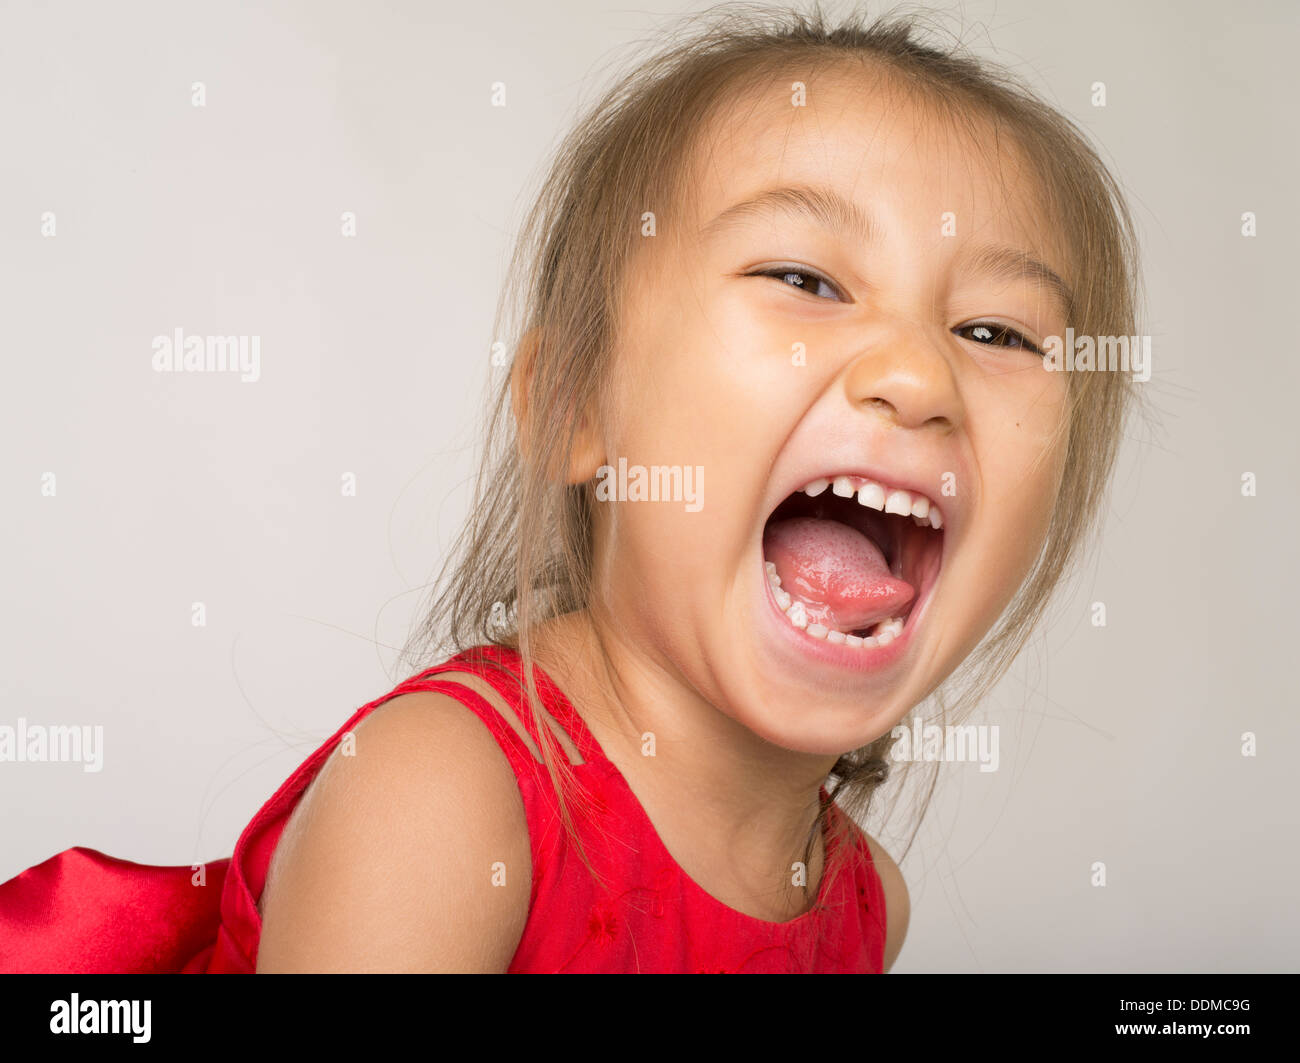 Young Asian girl laughing Stock Photo